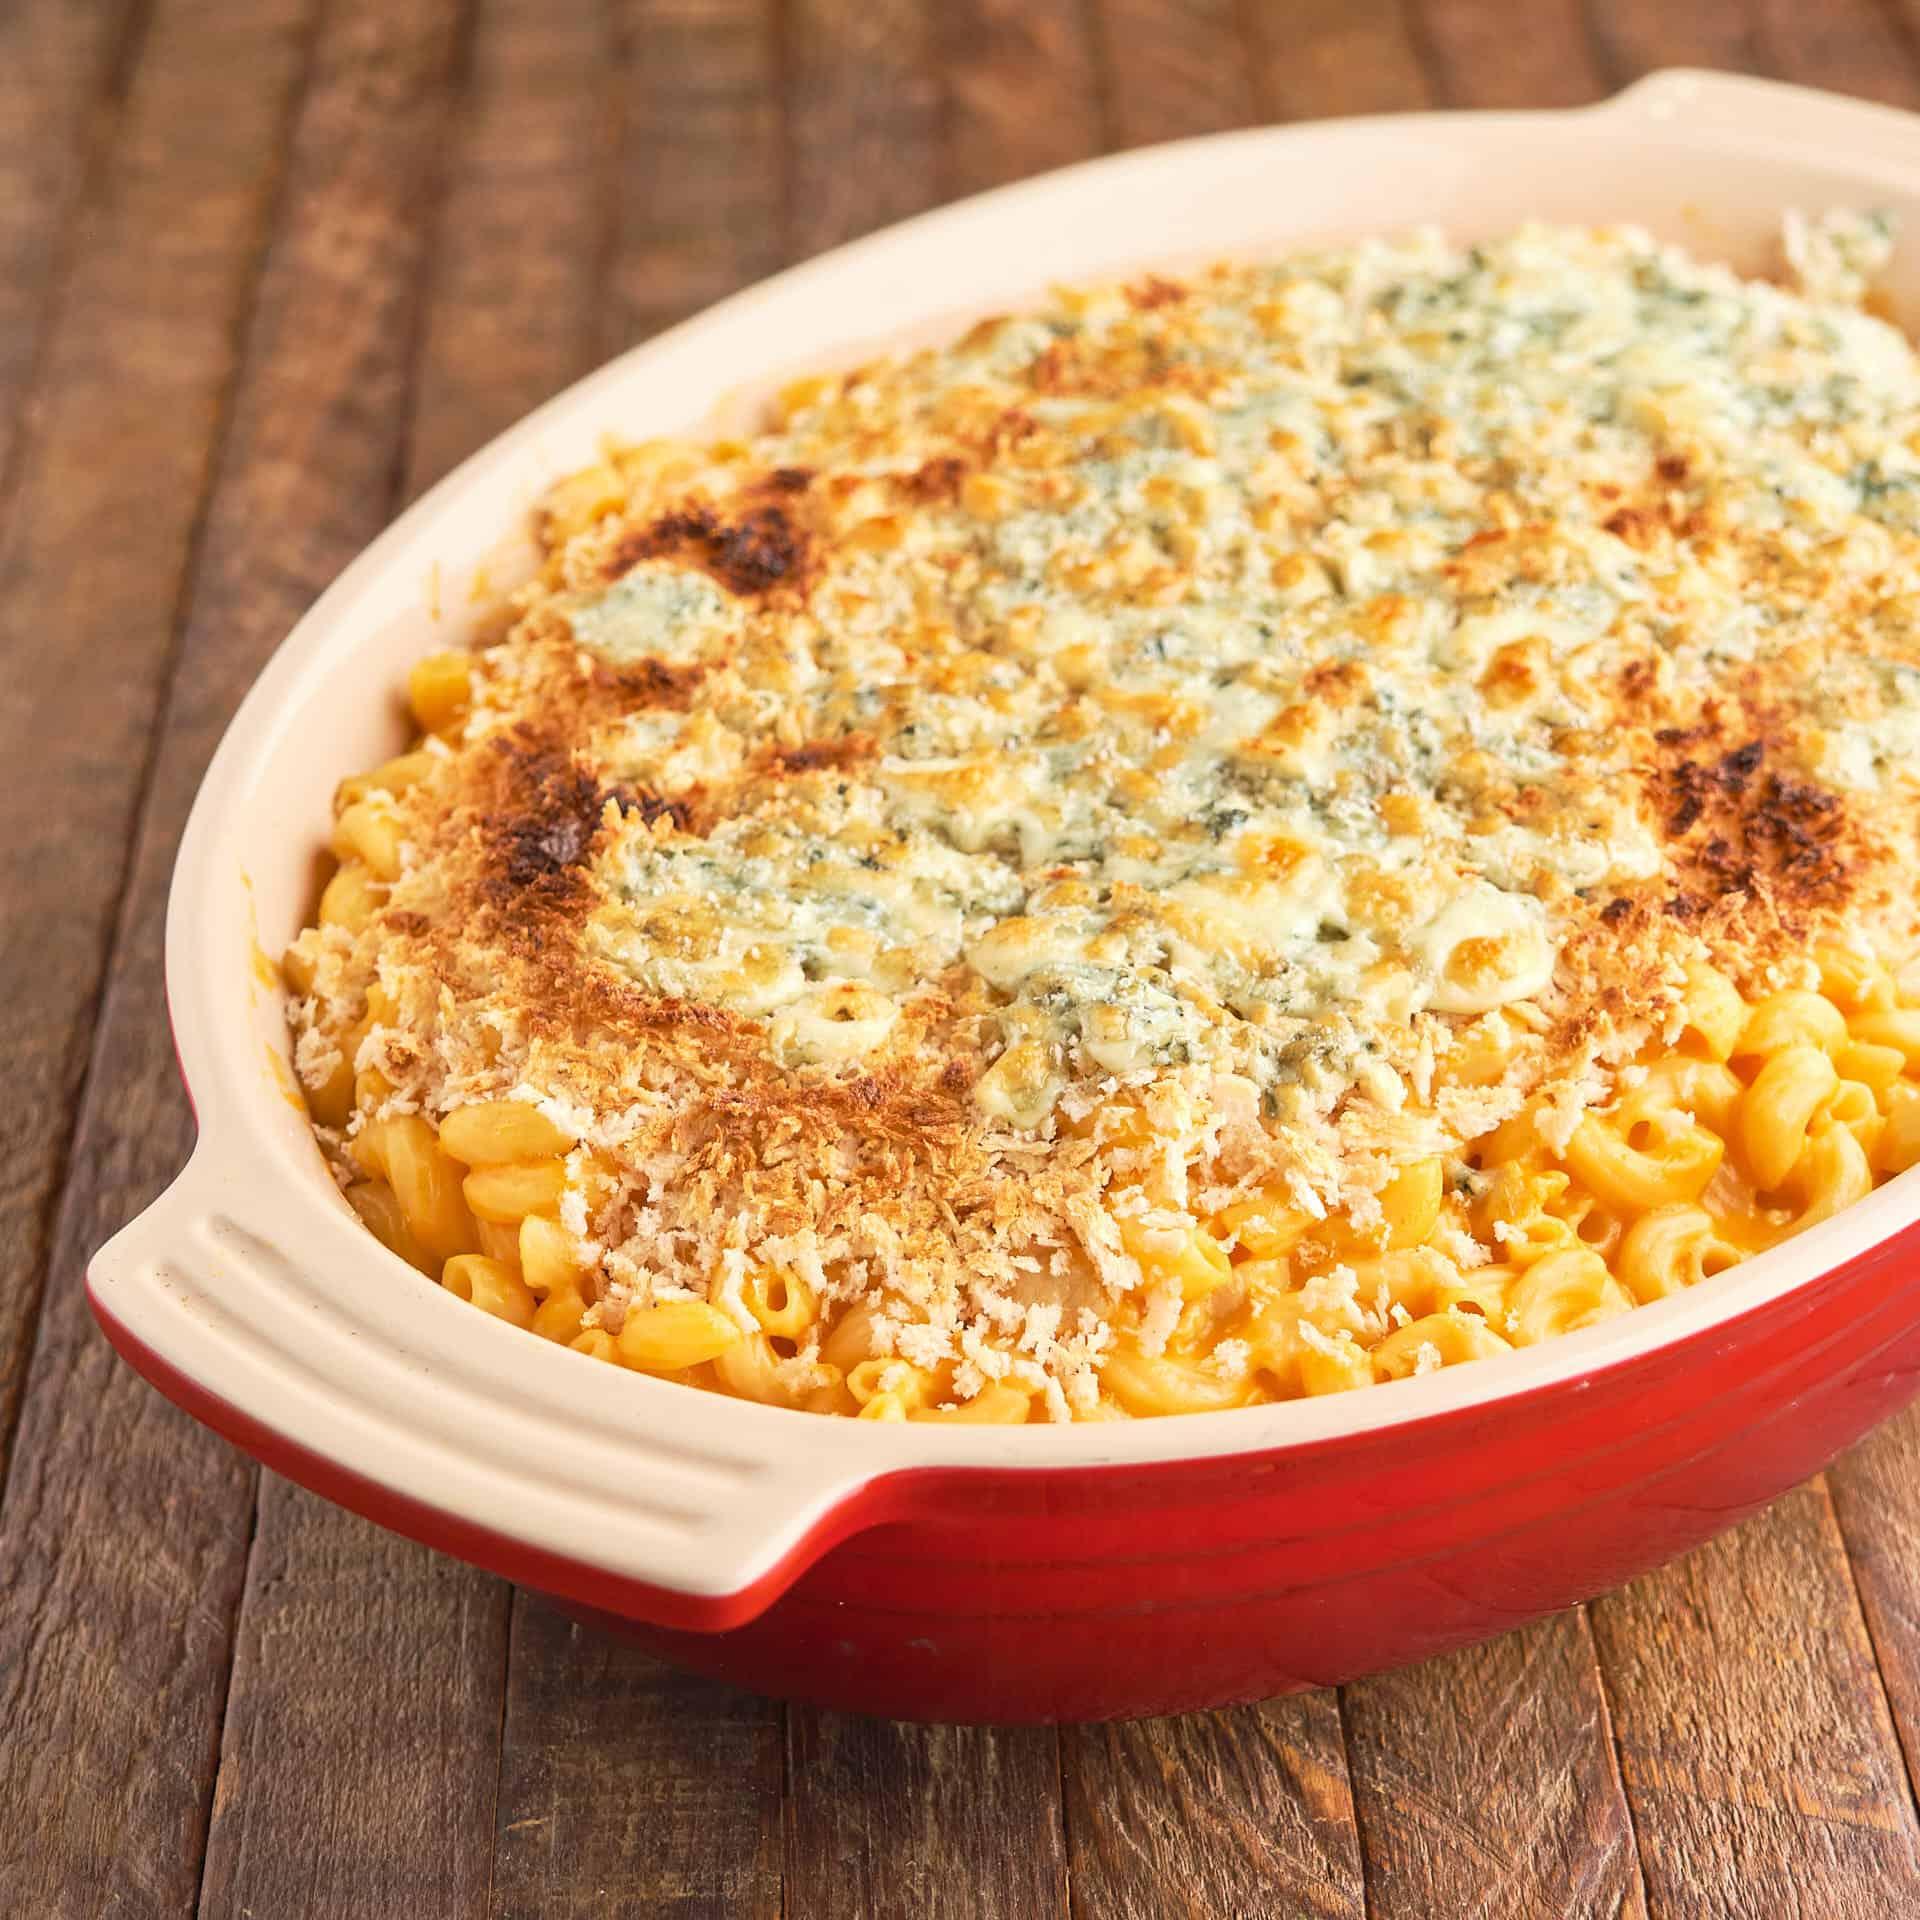 A red baking dish full of Instant Pot Buffalo Chicken Mac and Cheese, topped with a browned crust of breadcrumbs and blue cheese